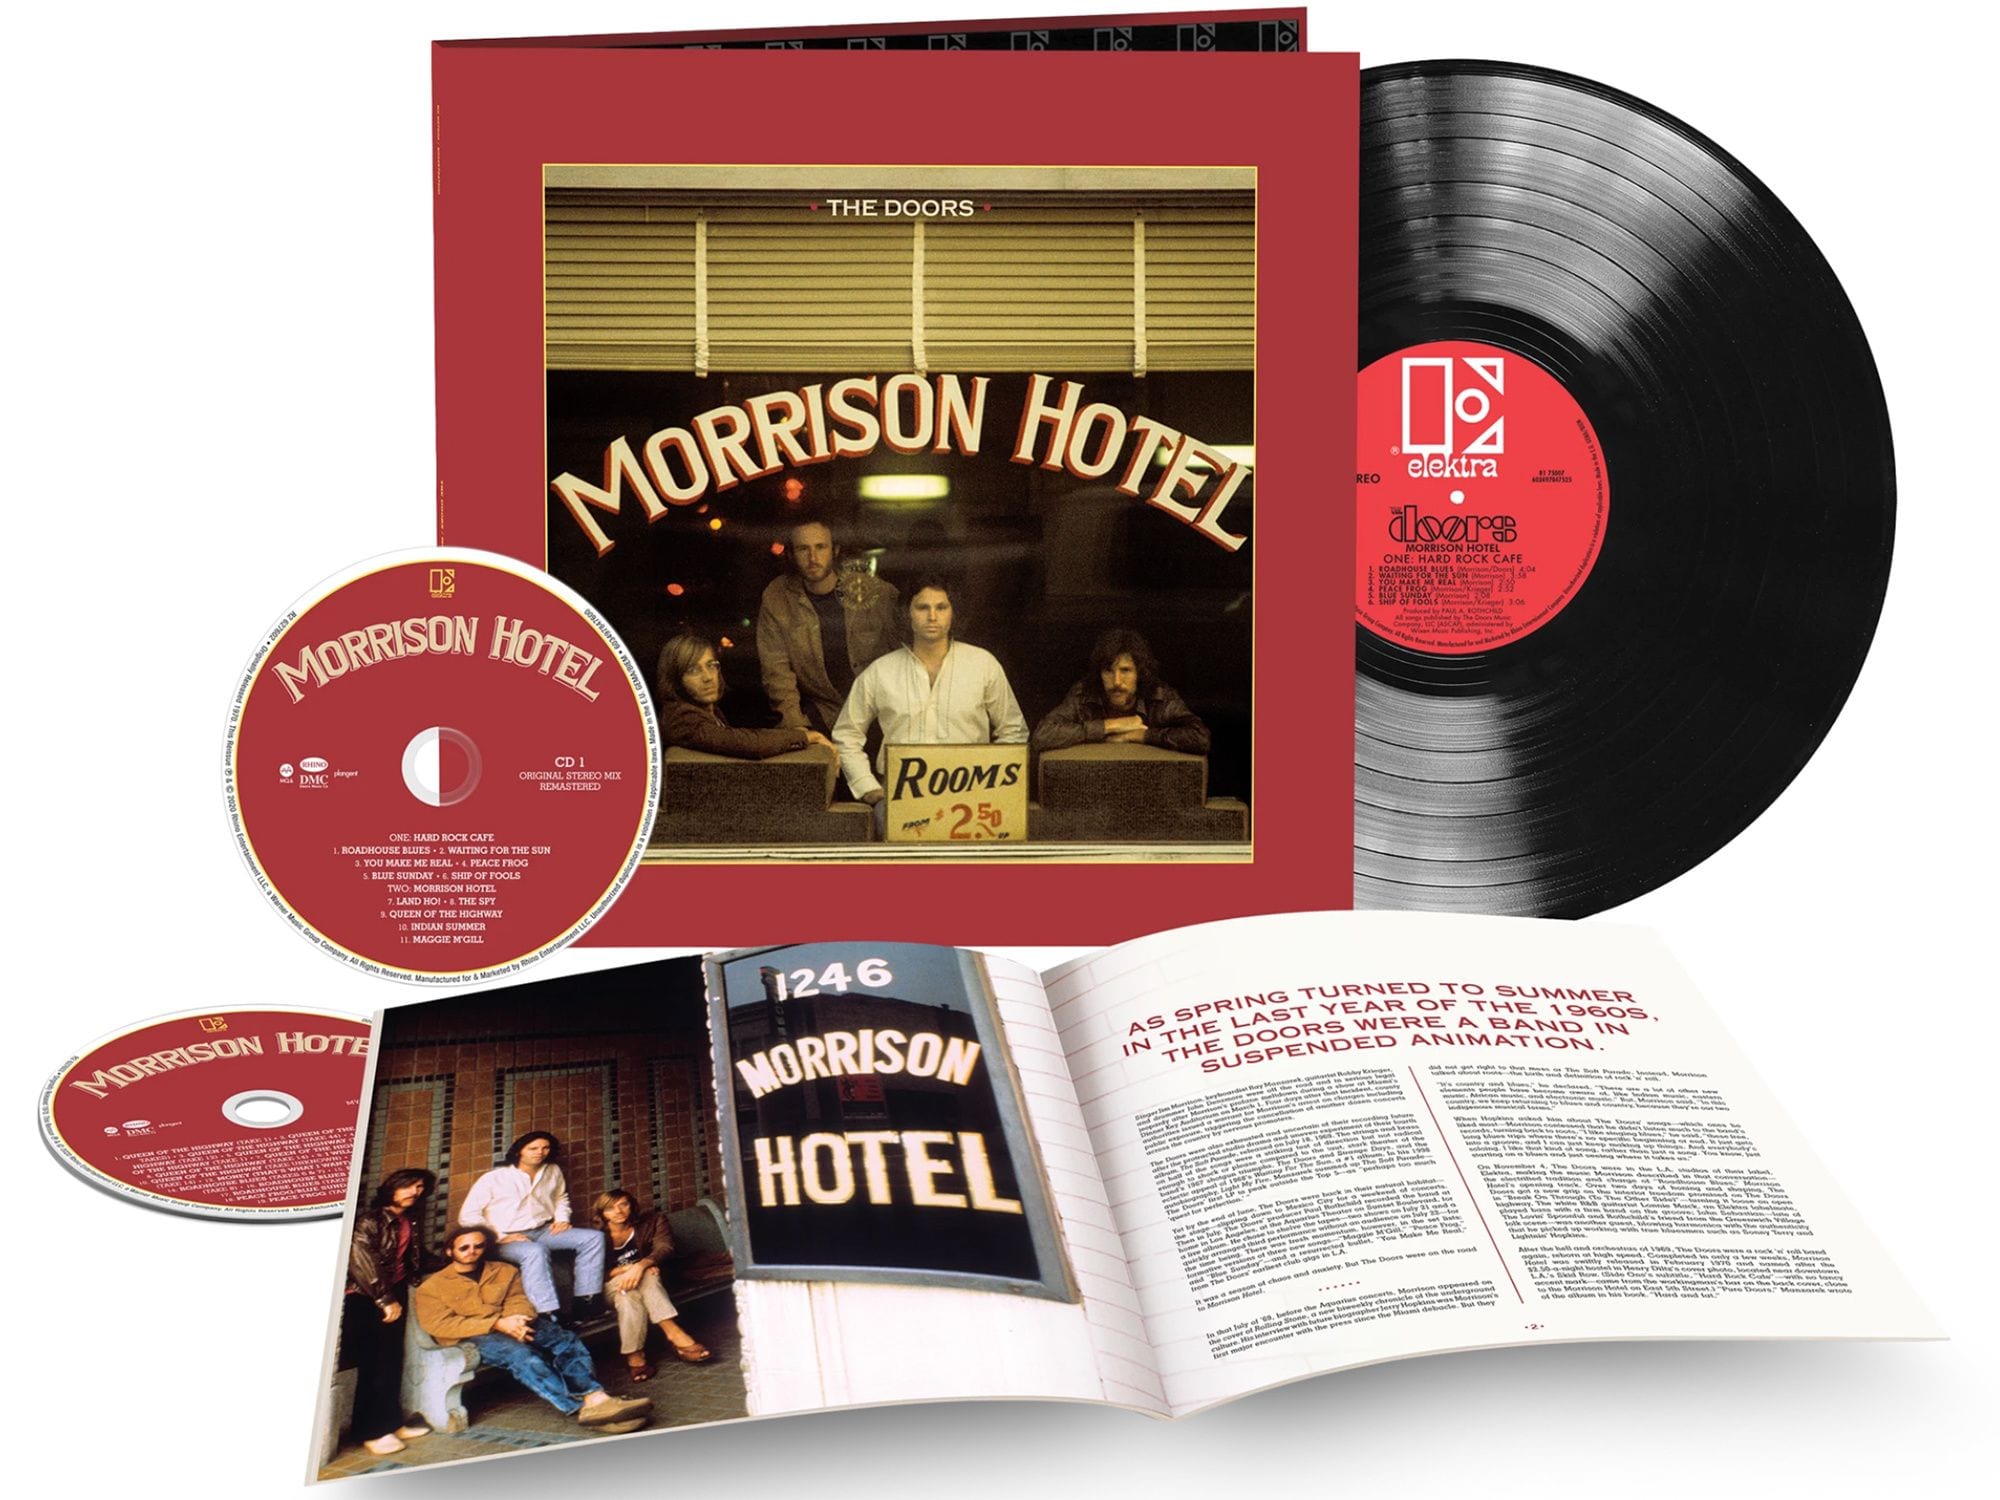 The Doors Check Into the ‘Morrison Hotel’